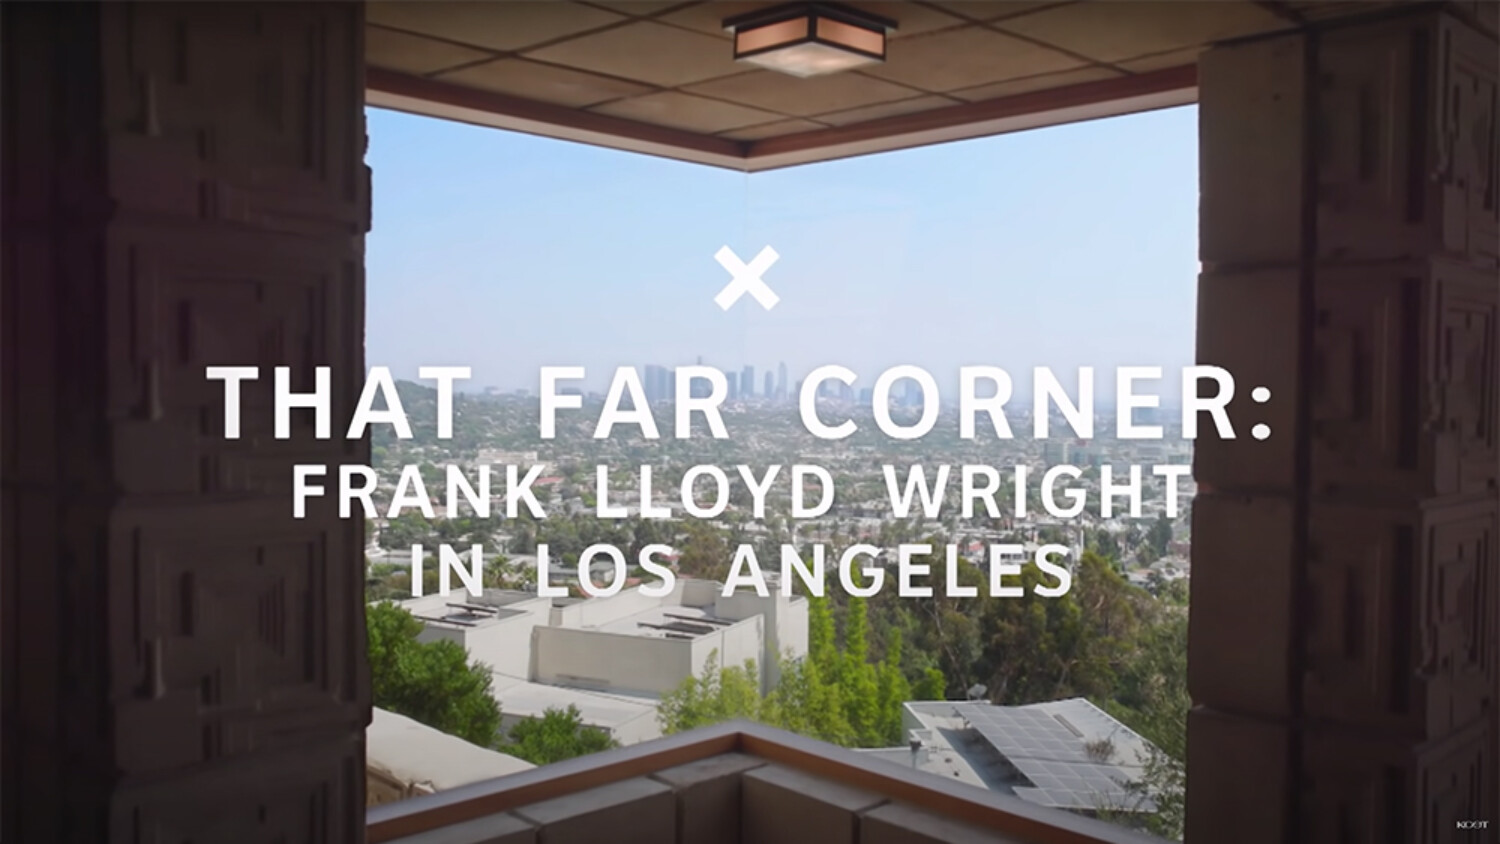 A Documentary Exploring Frank Lloyd Wright’s Architecture in Los Angeles